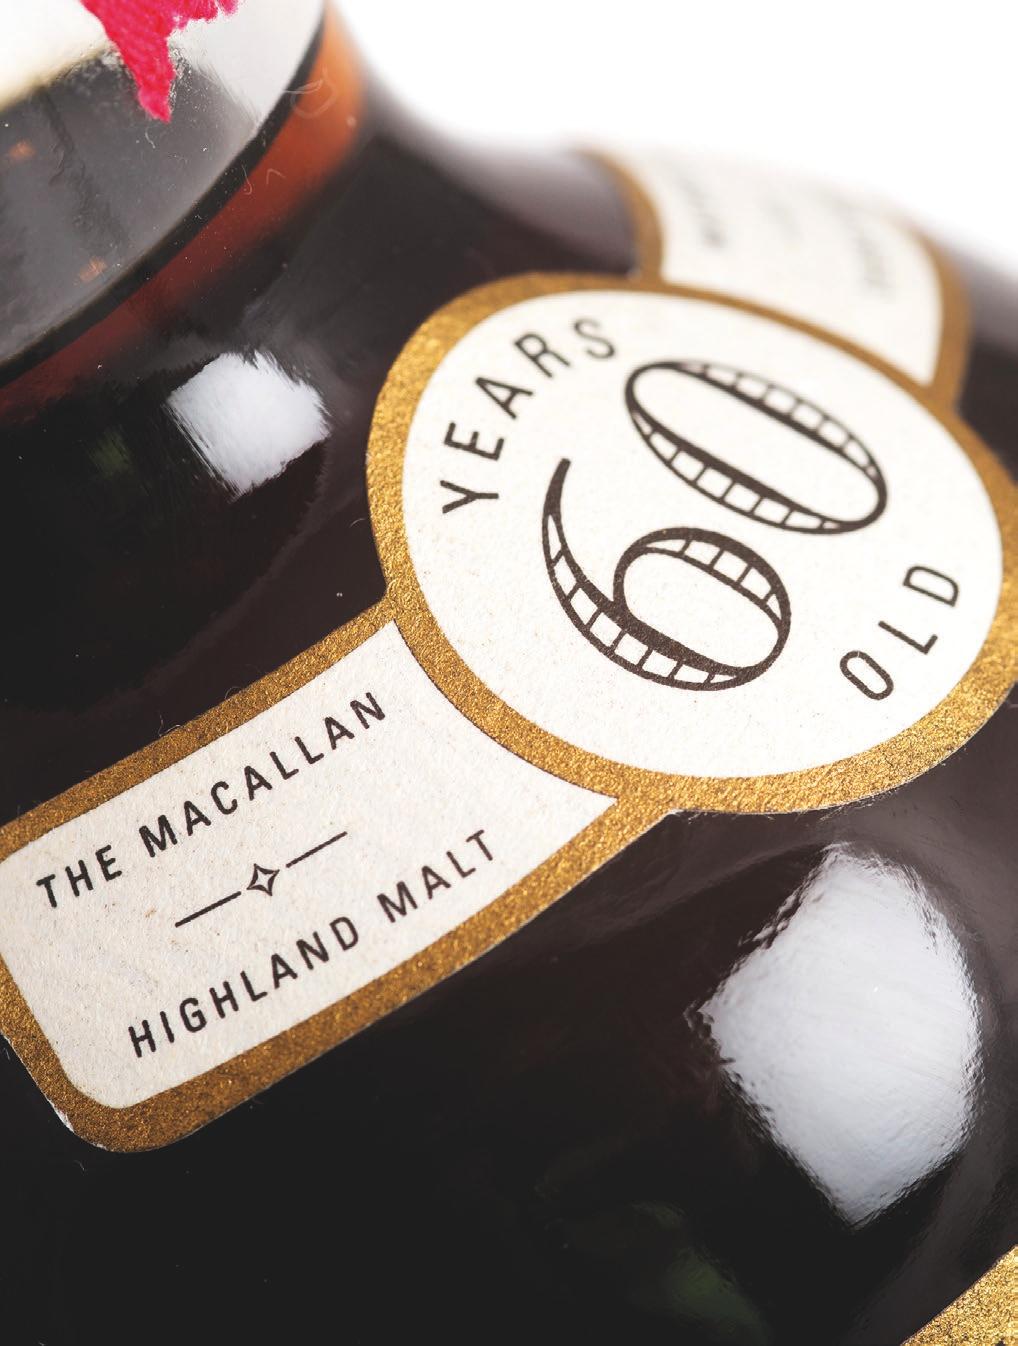 EXECUTIVE SUMMARY THE H1 REPORT ILLUSTRATES INCREASING GLOBAL DEMAND FOR RARE SINGLE MALT WHISKIES EVIDENCED BY SOLID INCREASES IN VOLUME AND VALUE TO END OF JUNE 2018.